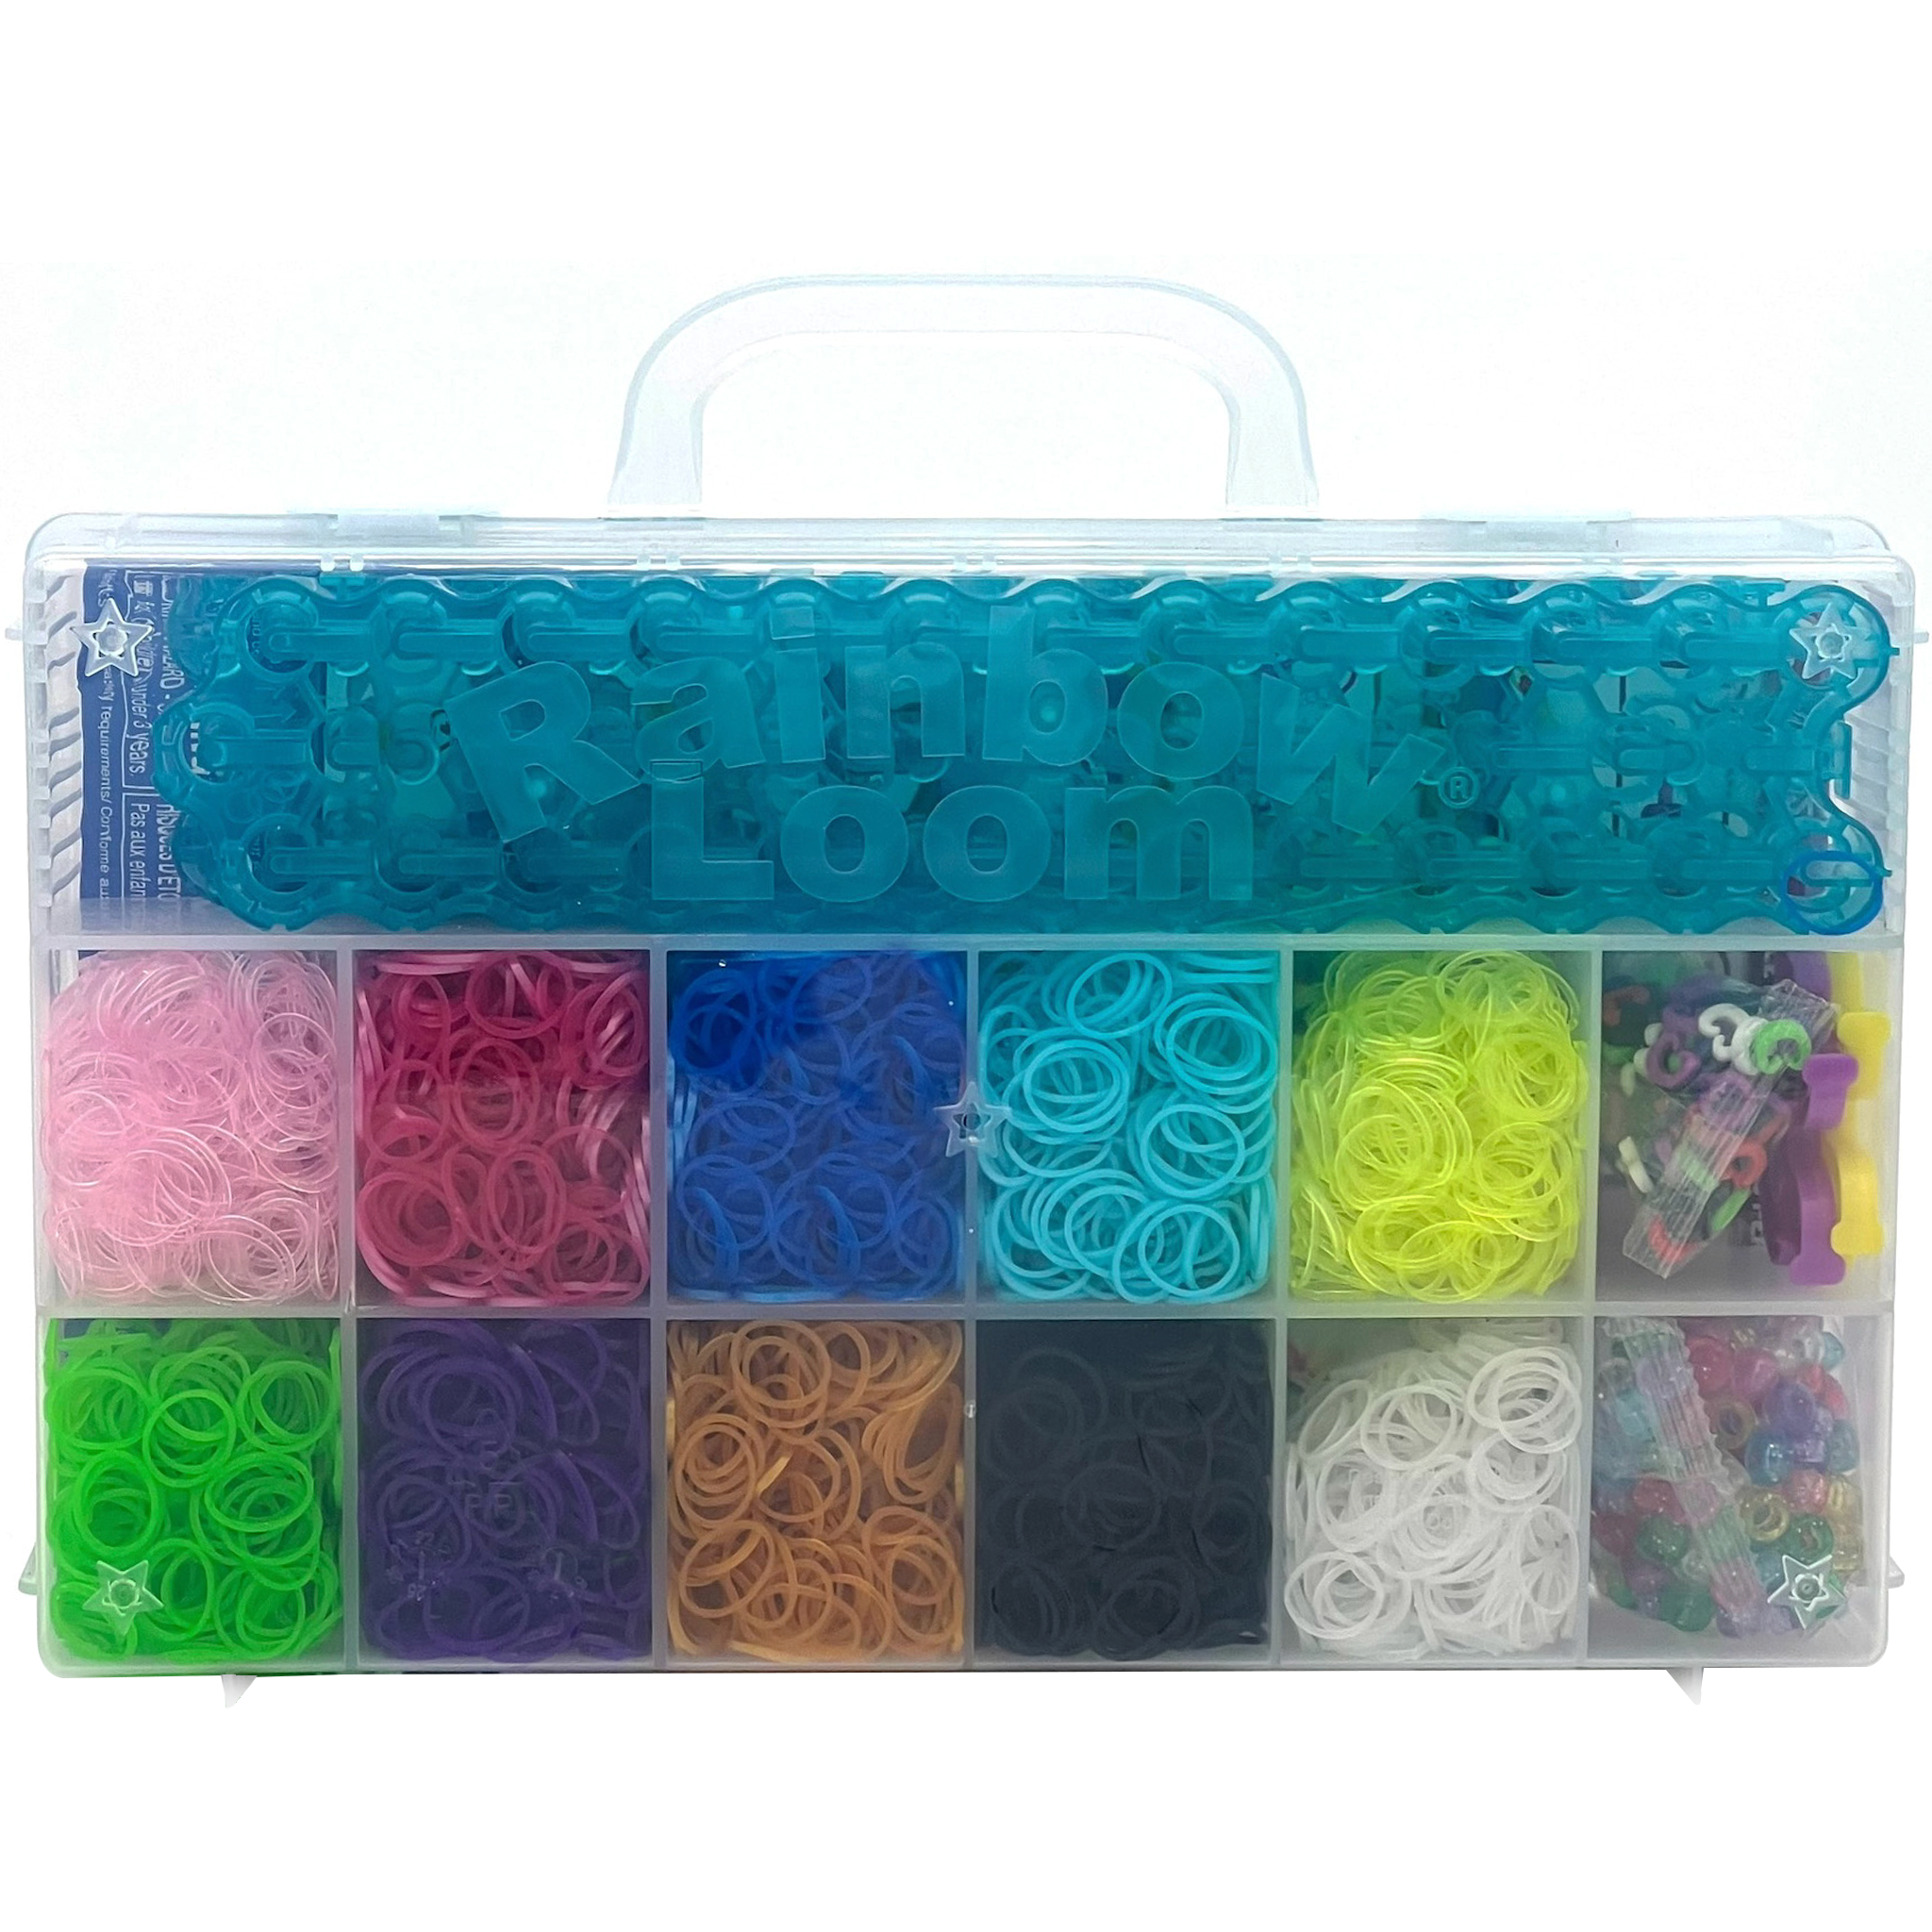  Rainbow Loom® Combo Set, Features 4000+ Colorful Rubber Bands,  2 Step-by-Step Bracelet Instructions, Organizer Case, Great Gift for Kids  7+ to Promote Fine Motor Skills : Toys & Games